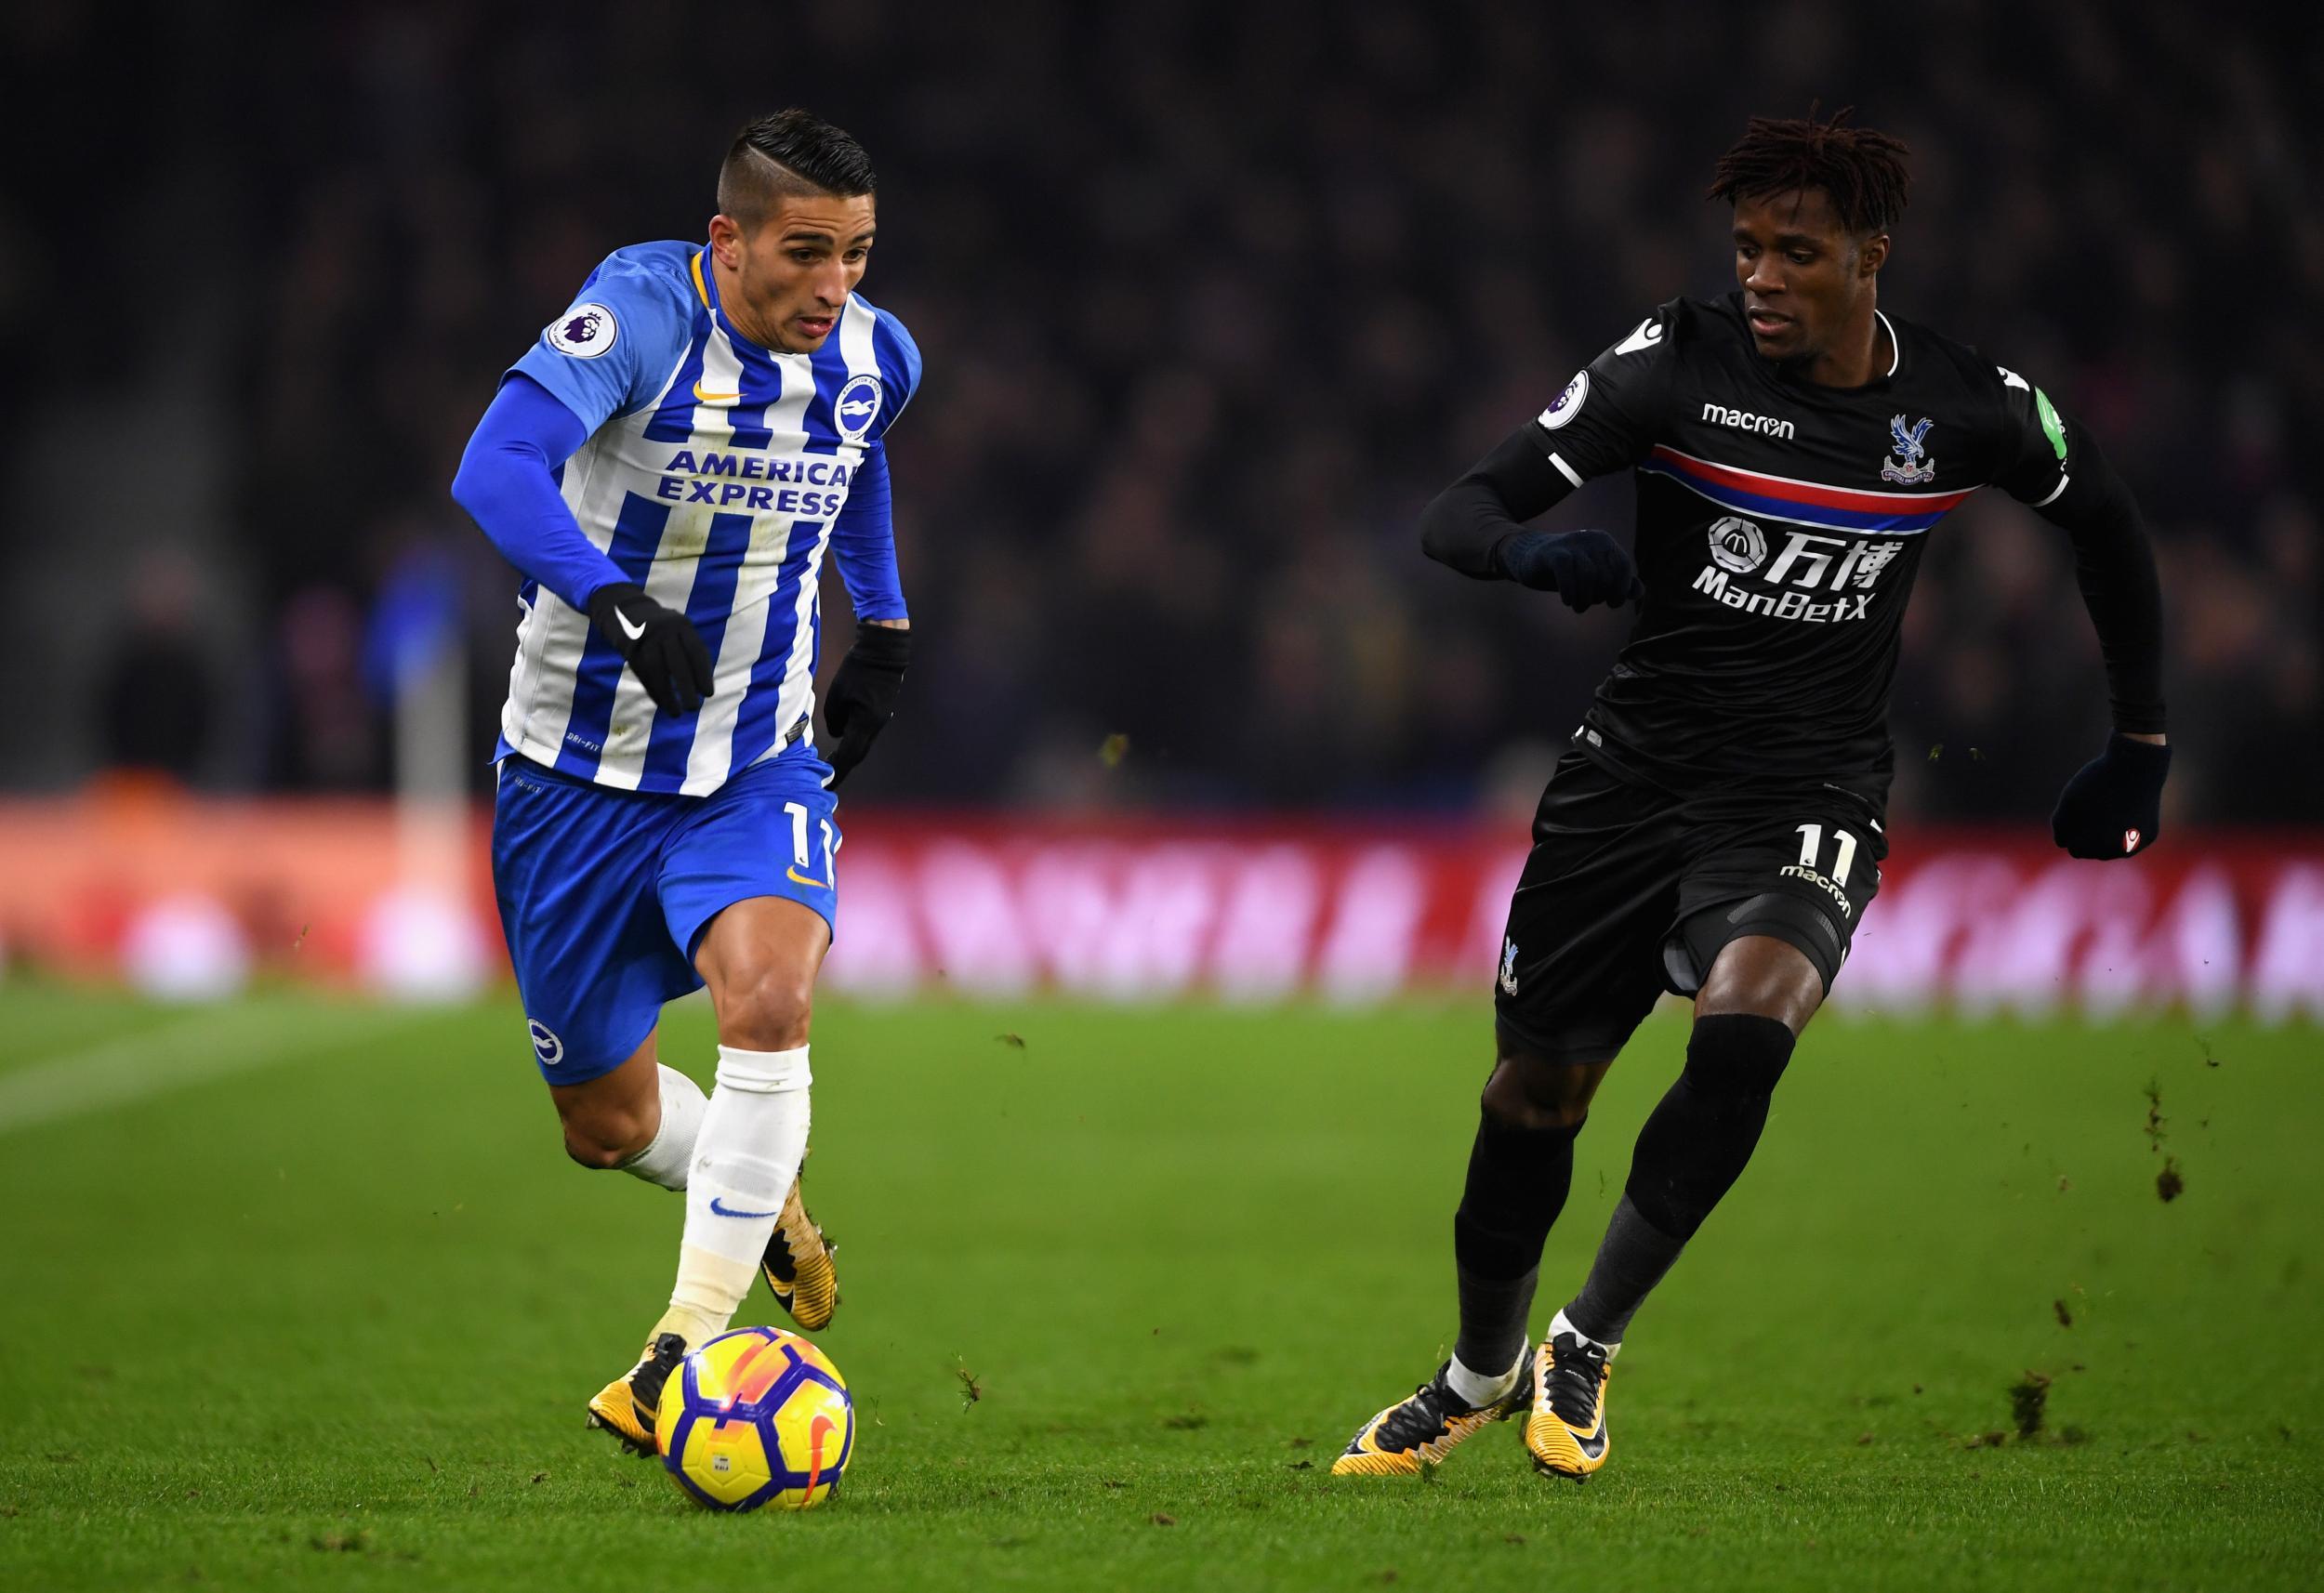 Anthony Knockaert and Wilfried Zaha had a running battle all game